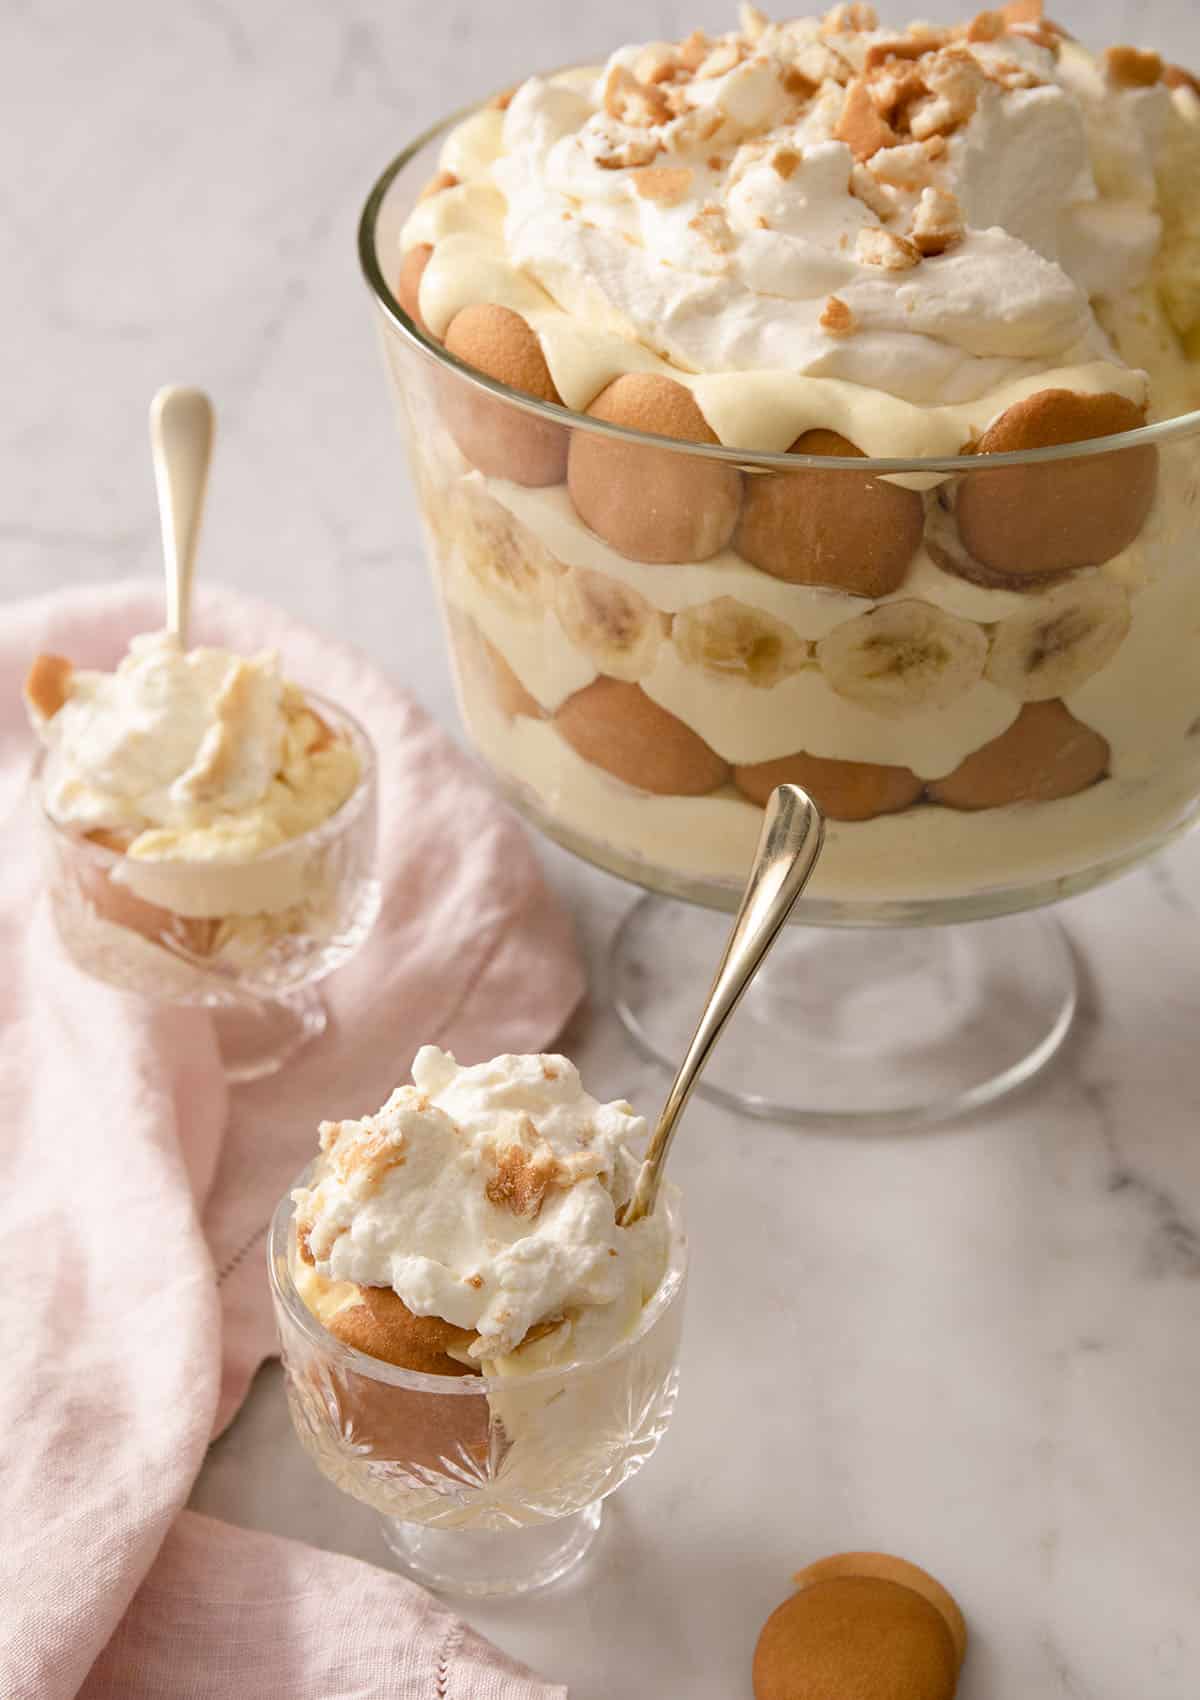 A banana pudding in a trifle dish with portions in smaller serving glasses.